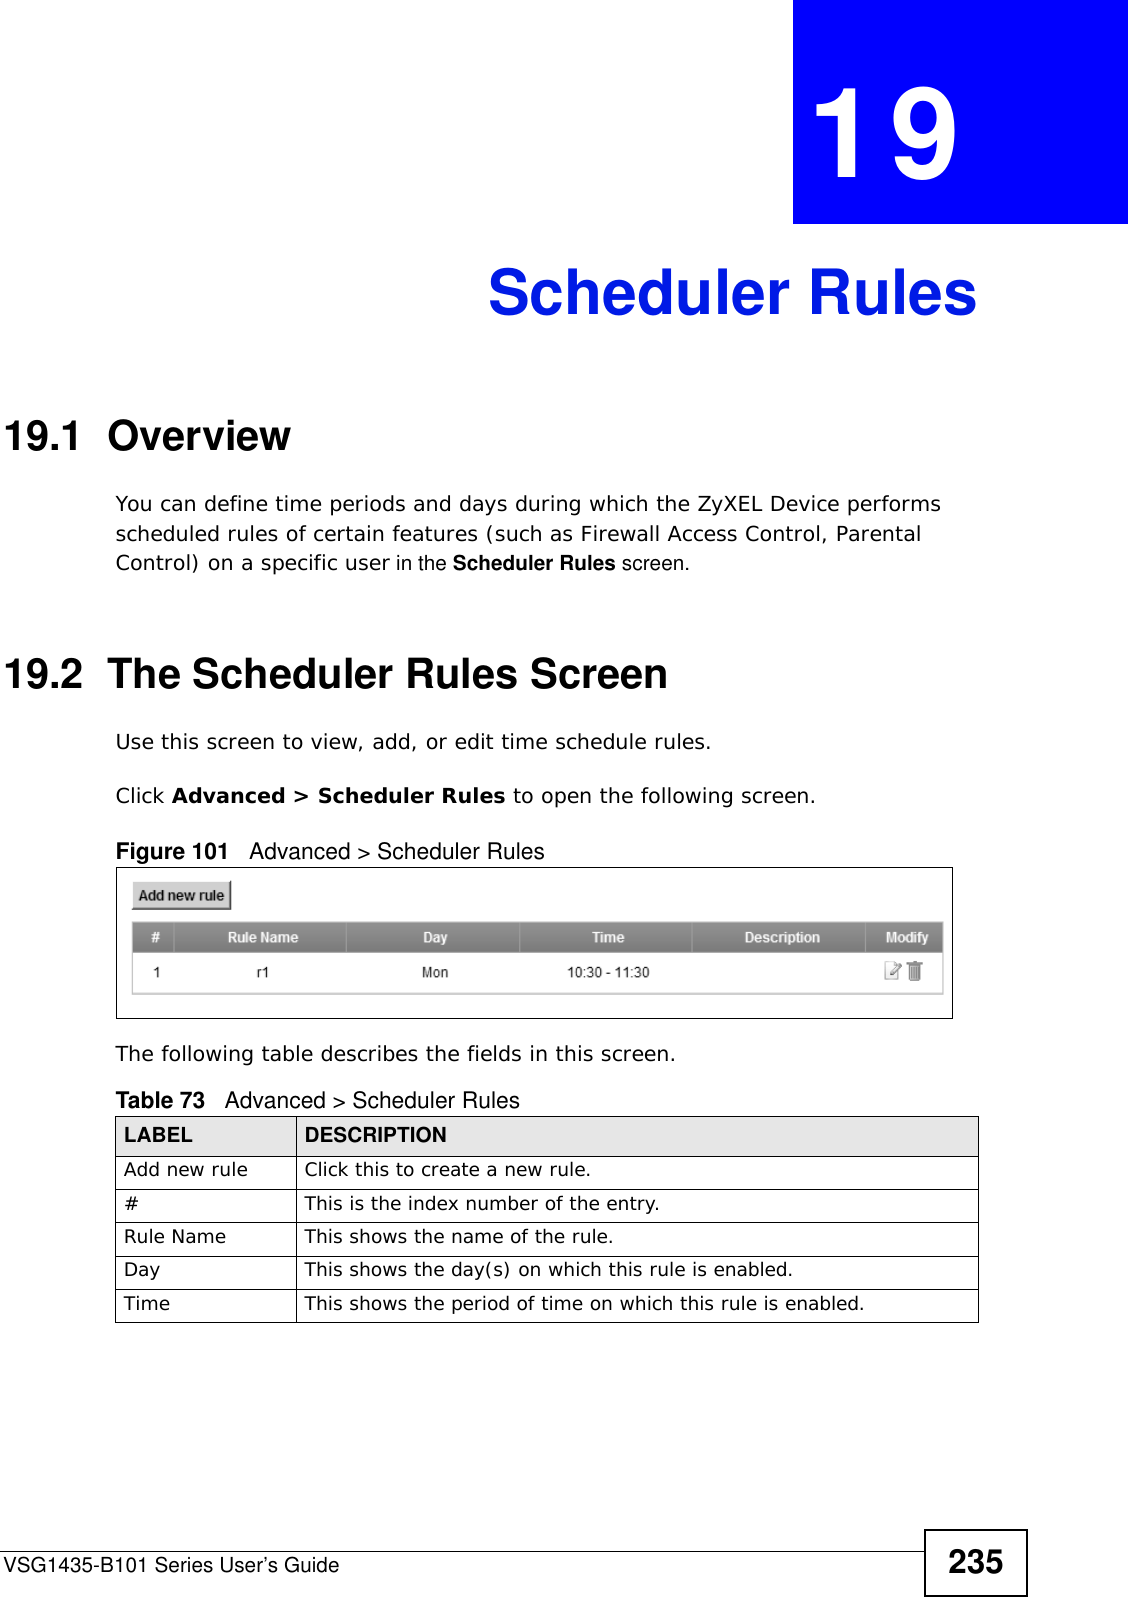 VSG1435-B101 Series User’s Guide 235CHAPTER  19 Scheduler Rules19.1  OverviewYou can define time periods and days during which the ZyXEL Device performs scheduled rules of certain features (such as Firewall Access Control, Parental Control) on a specific user in the Scheduler Rules screen. 19.2  The Scheduler Rules ScreenUse this screen to view, add, or edit time schedule rules.Click Advanced &gt; Scheduler Rules to open the following screen. Figure 101   Advanced &gt; Scheduler Rules The following table describes the fields in this screen. Table 73   Advanced &gt; Scheduler RulesLABEL DESCRIPTIONAdd new rule Click this to create a new rule.#This is the index number of the entry.Rule Name This shows the name of the rule.Day This shows the day(s) on which this rule is enabled.Time This shows the period of time on which this rule is enabled.